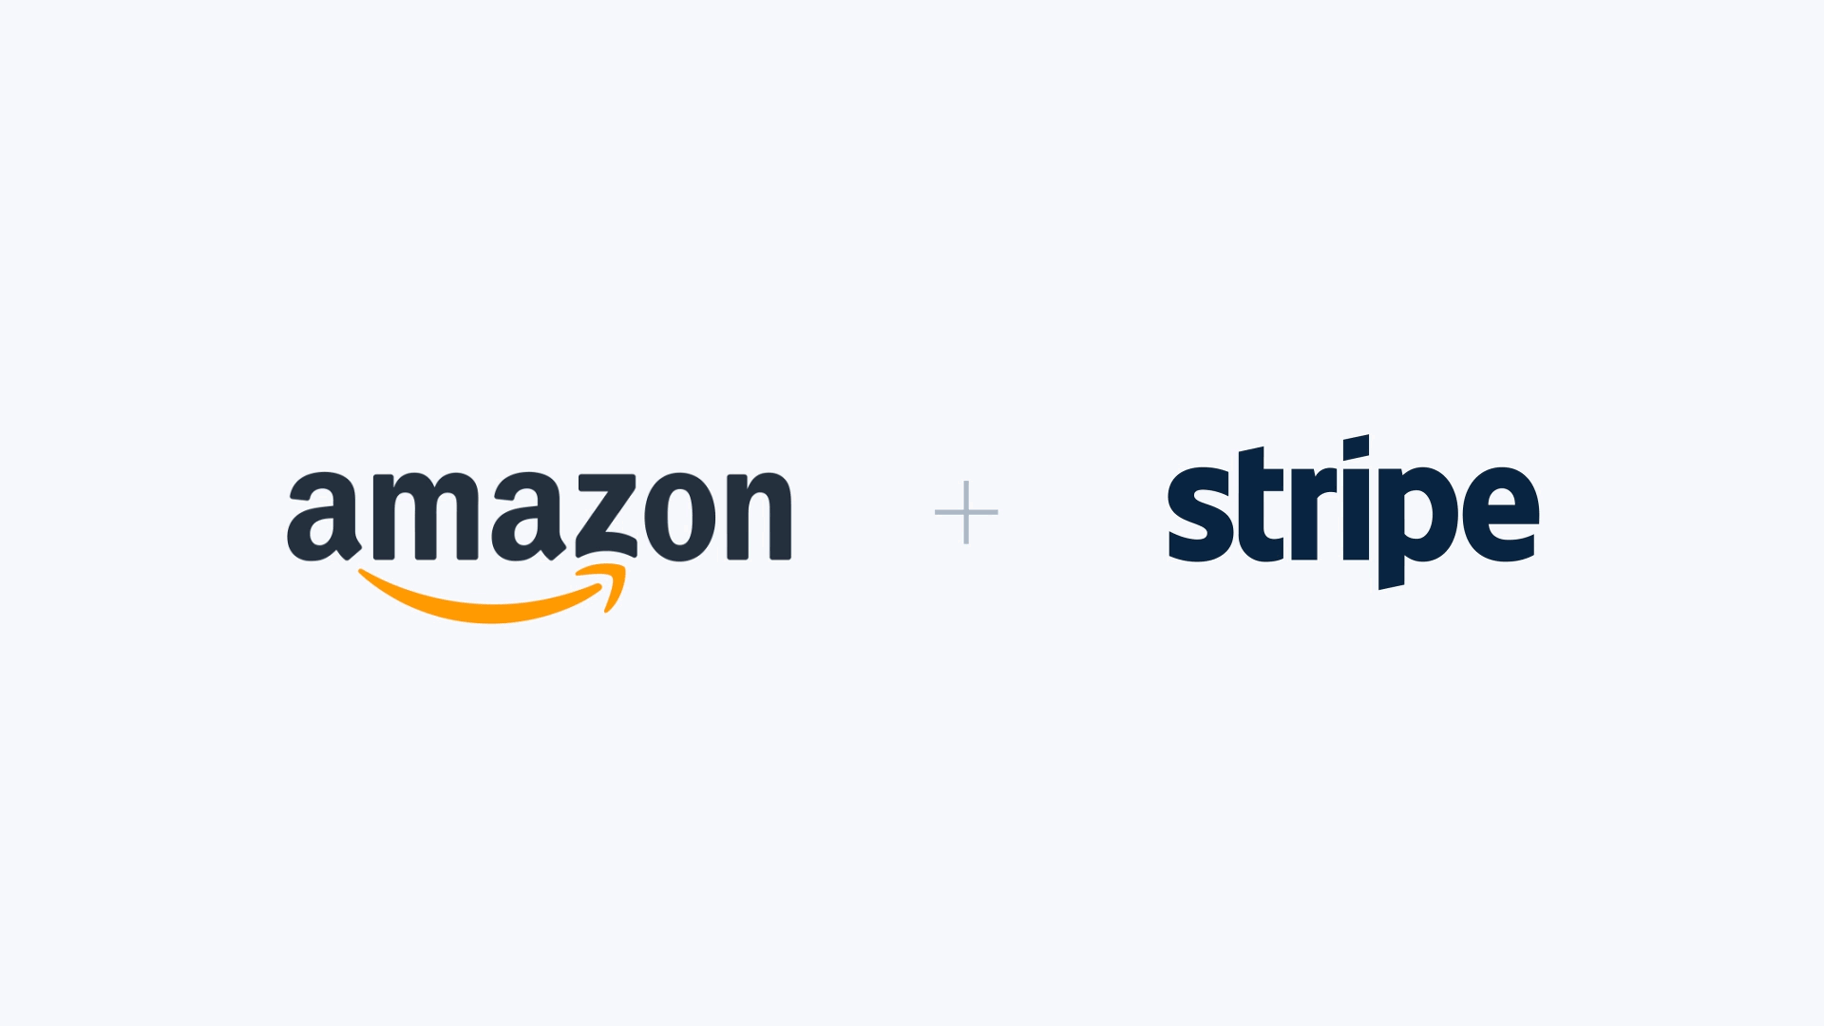 Amazon and Stripe have signed an expanded global agreement under which Amazon will significantly expand its use of Stripe’s core payments platform a